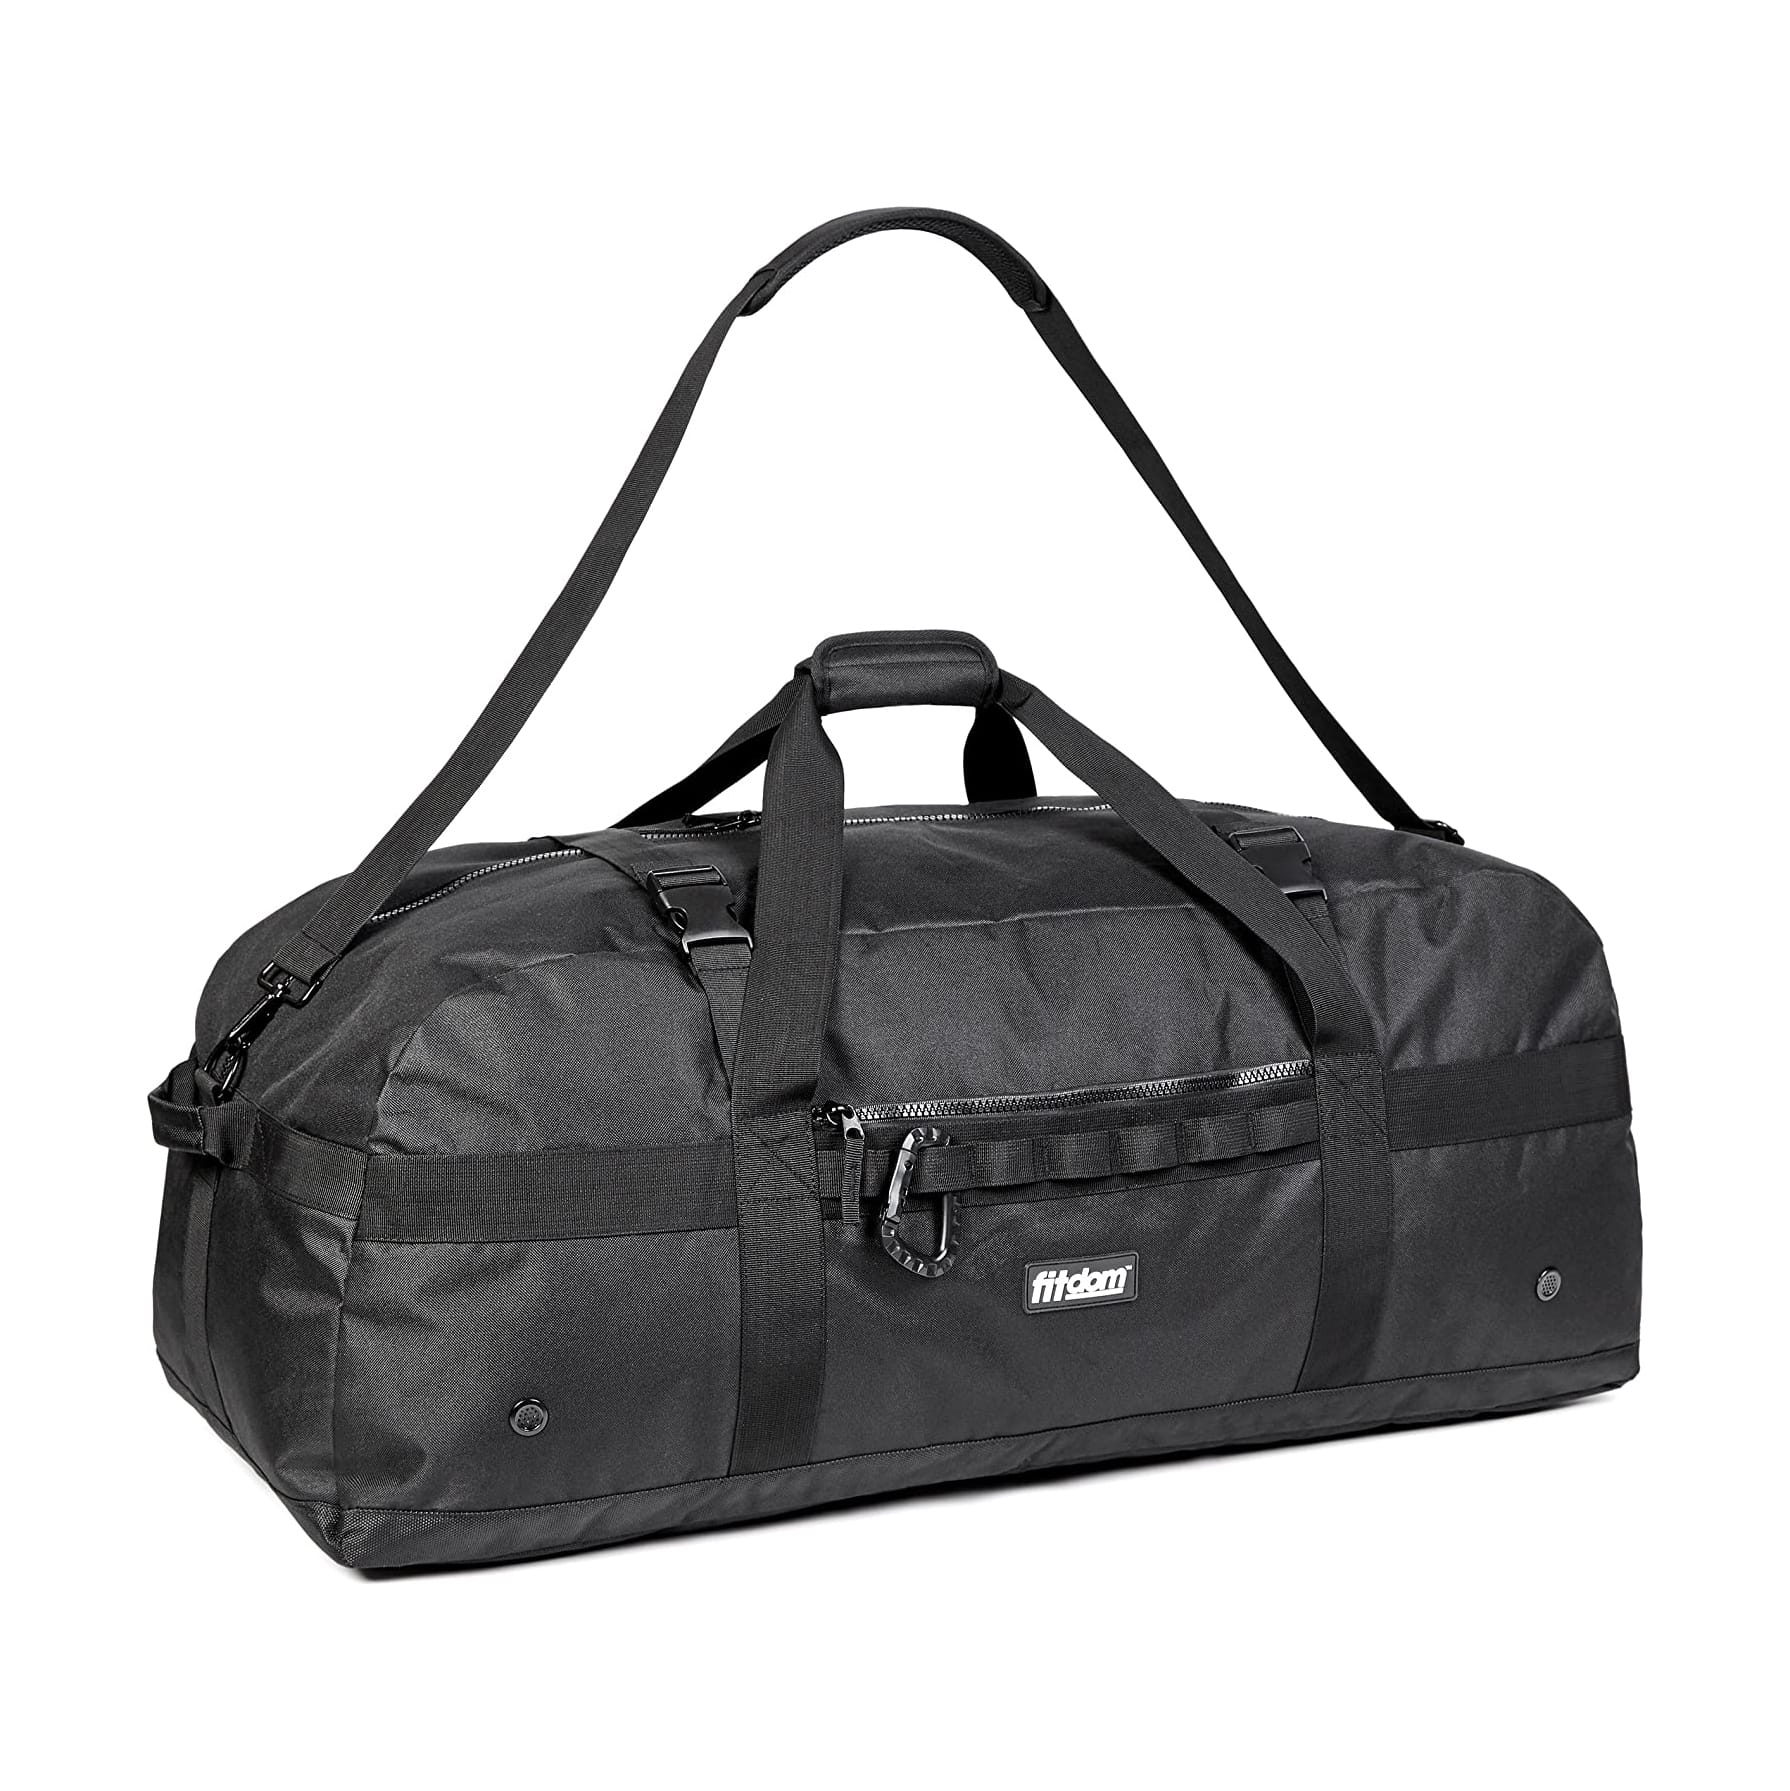 Top 10 Best Hockey Bags in 2022 Reviews - Show Guide Me